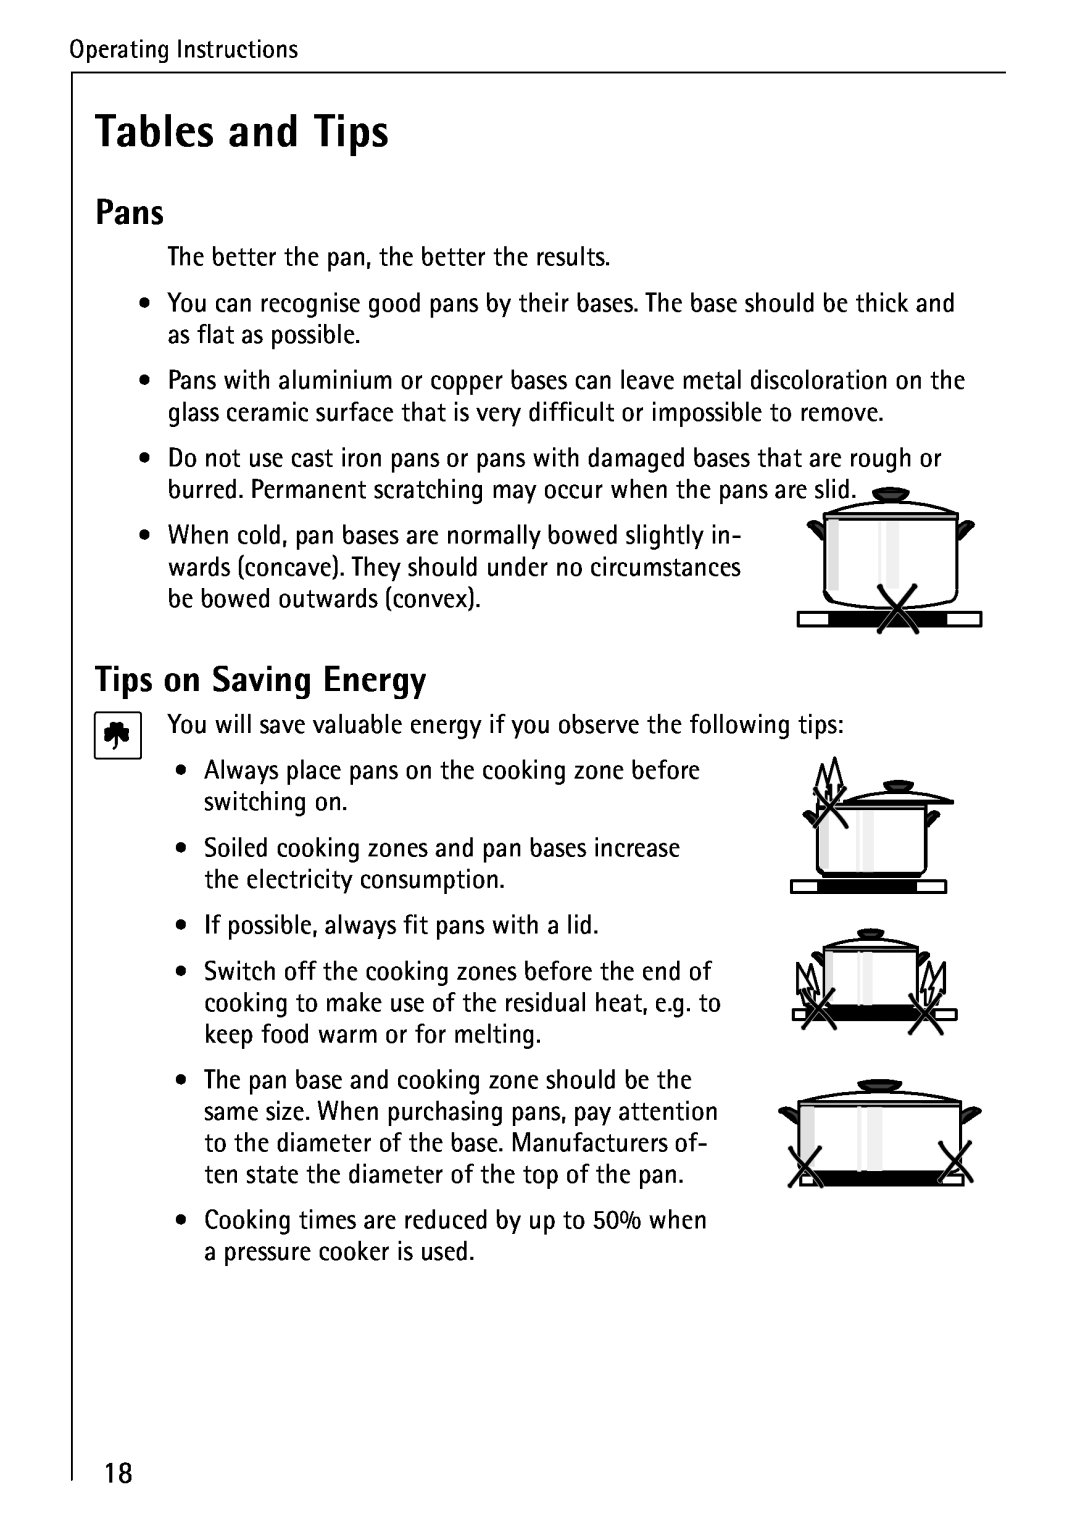 Electrolux 65300KF-an operating instructions Tables and Tips, Pans, Tips on Saving Energy 